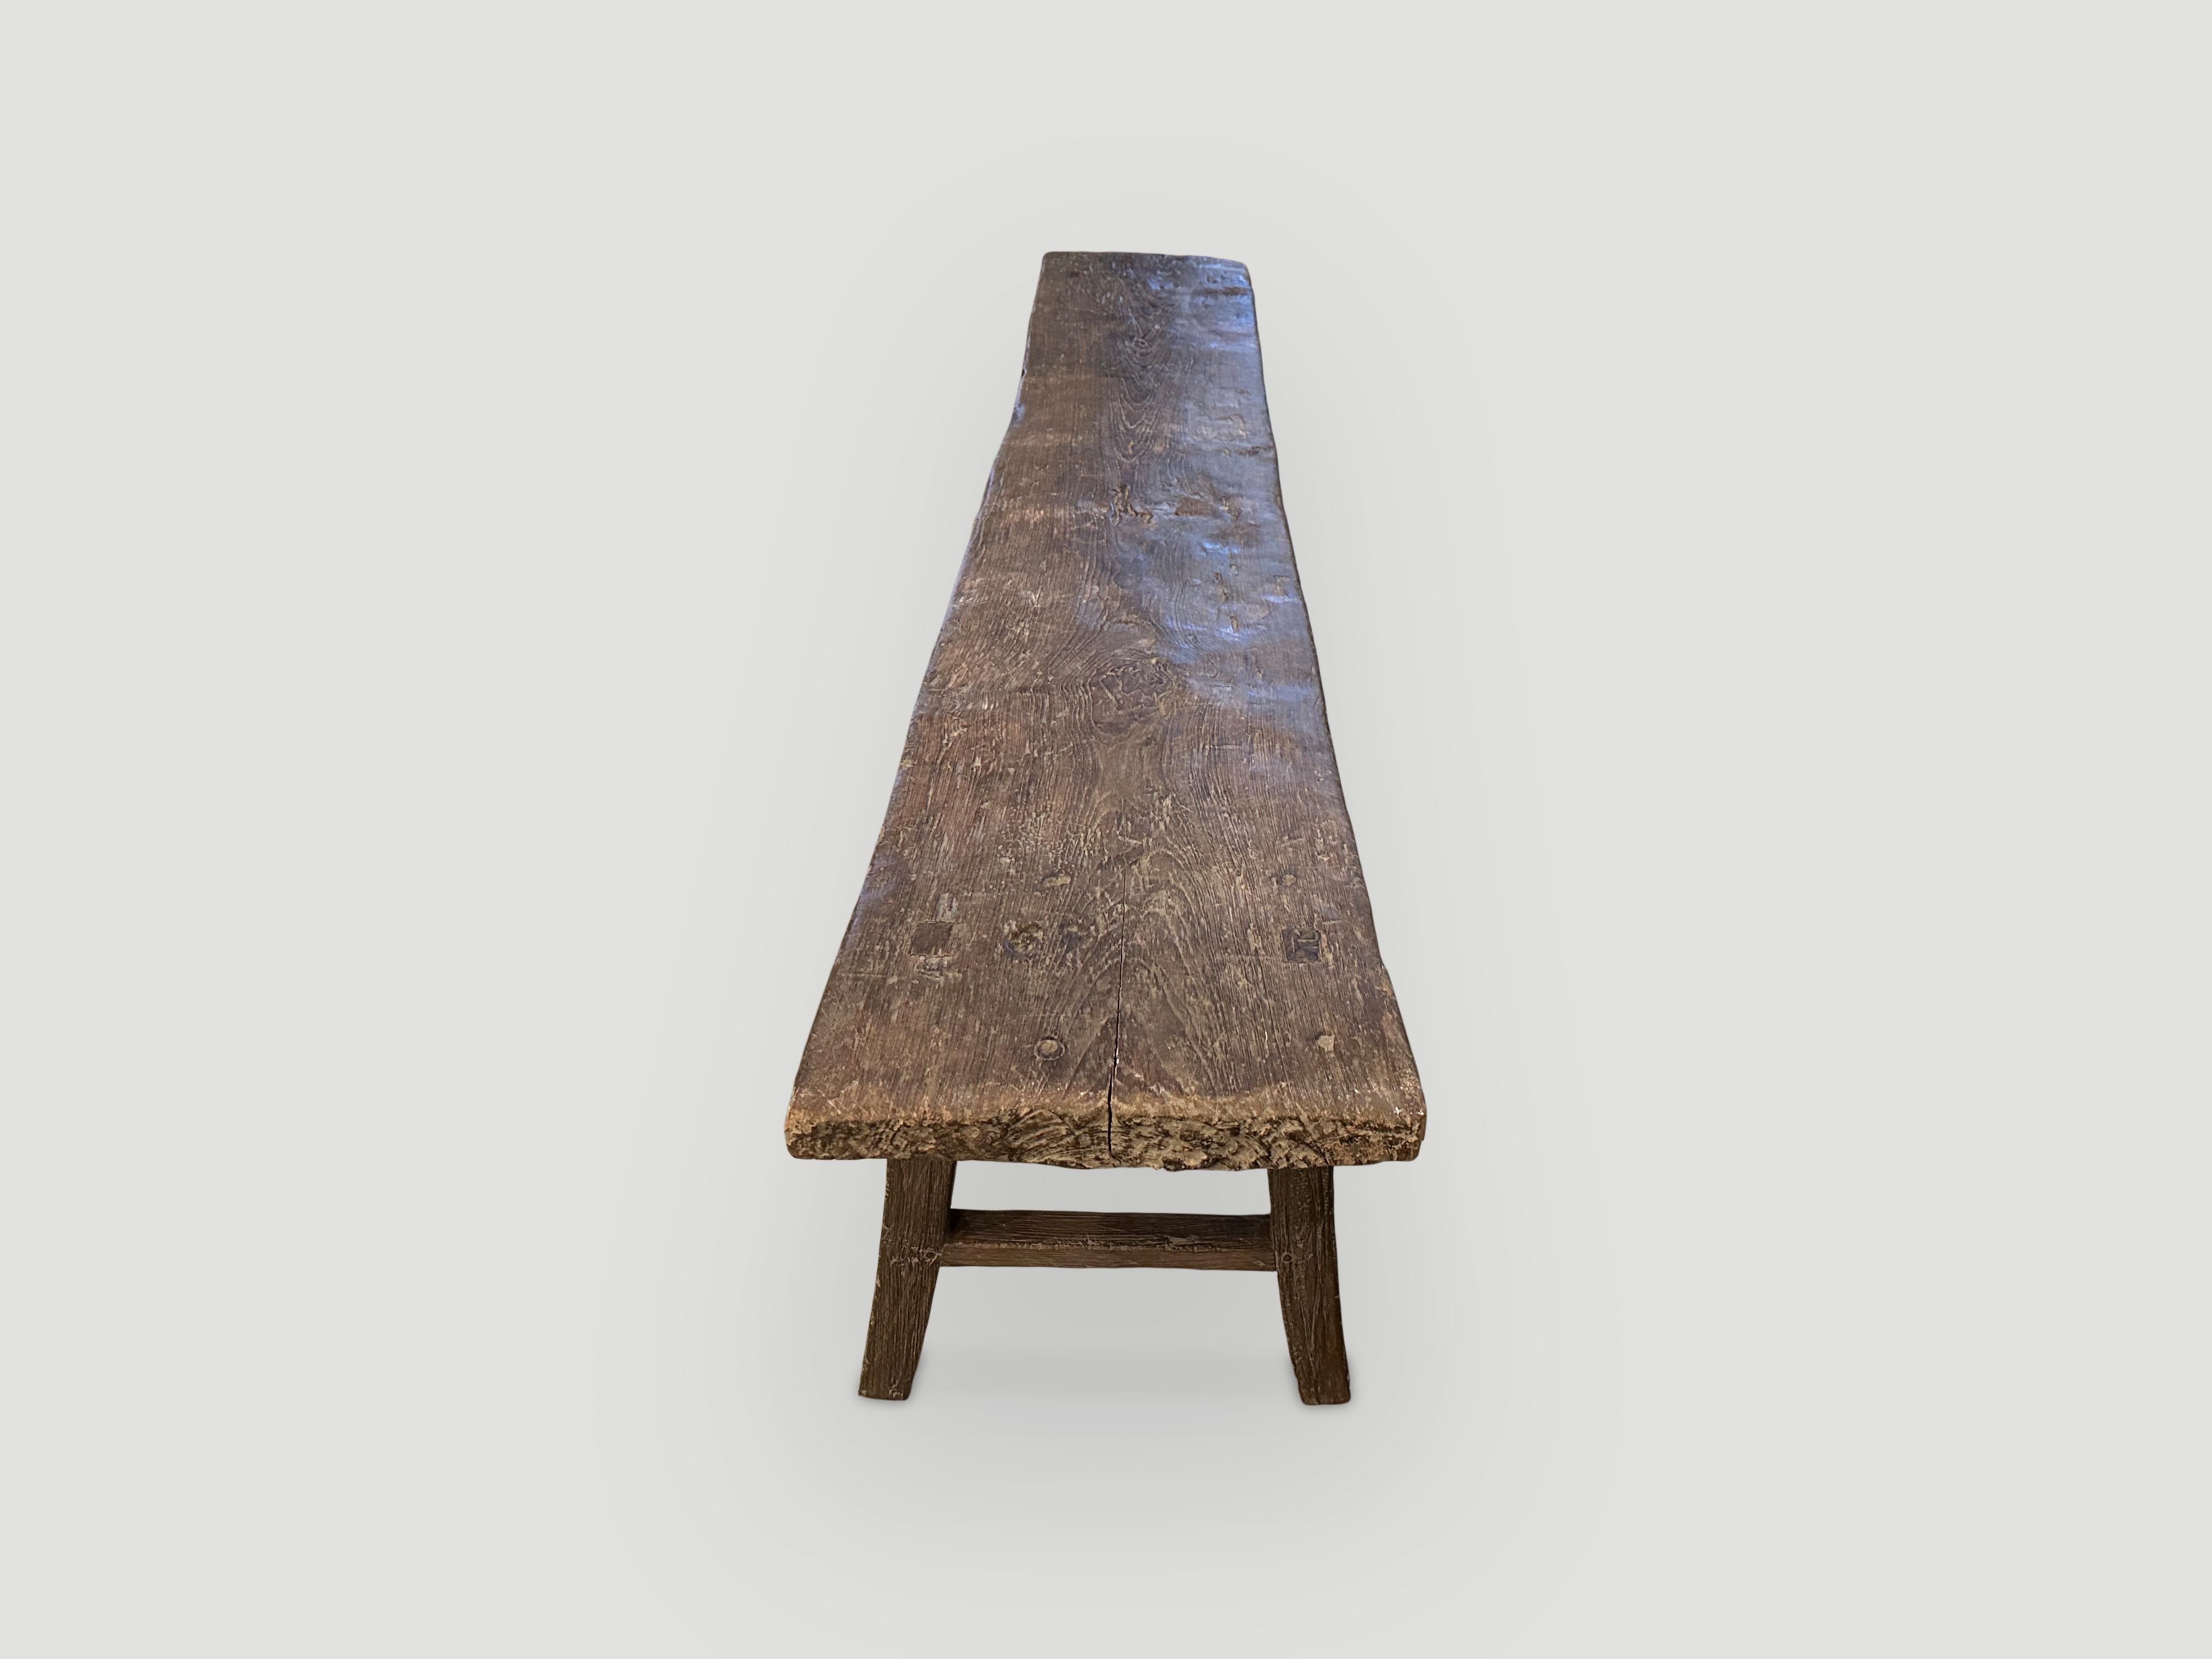 Antique beautiful single teak slab with lovely patina. We added legs to this aged panel. 

This bench was hand made in the spirit of Wabi-Sabi, a Japanese philosophy that beauty can be found in imperfection and impermanence. It is a beauty of